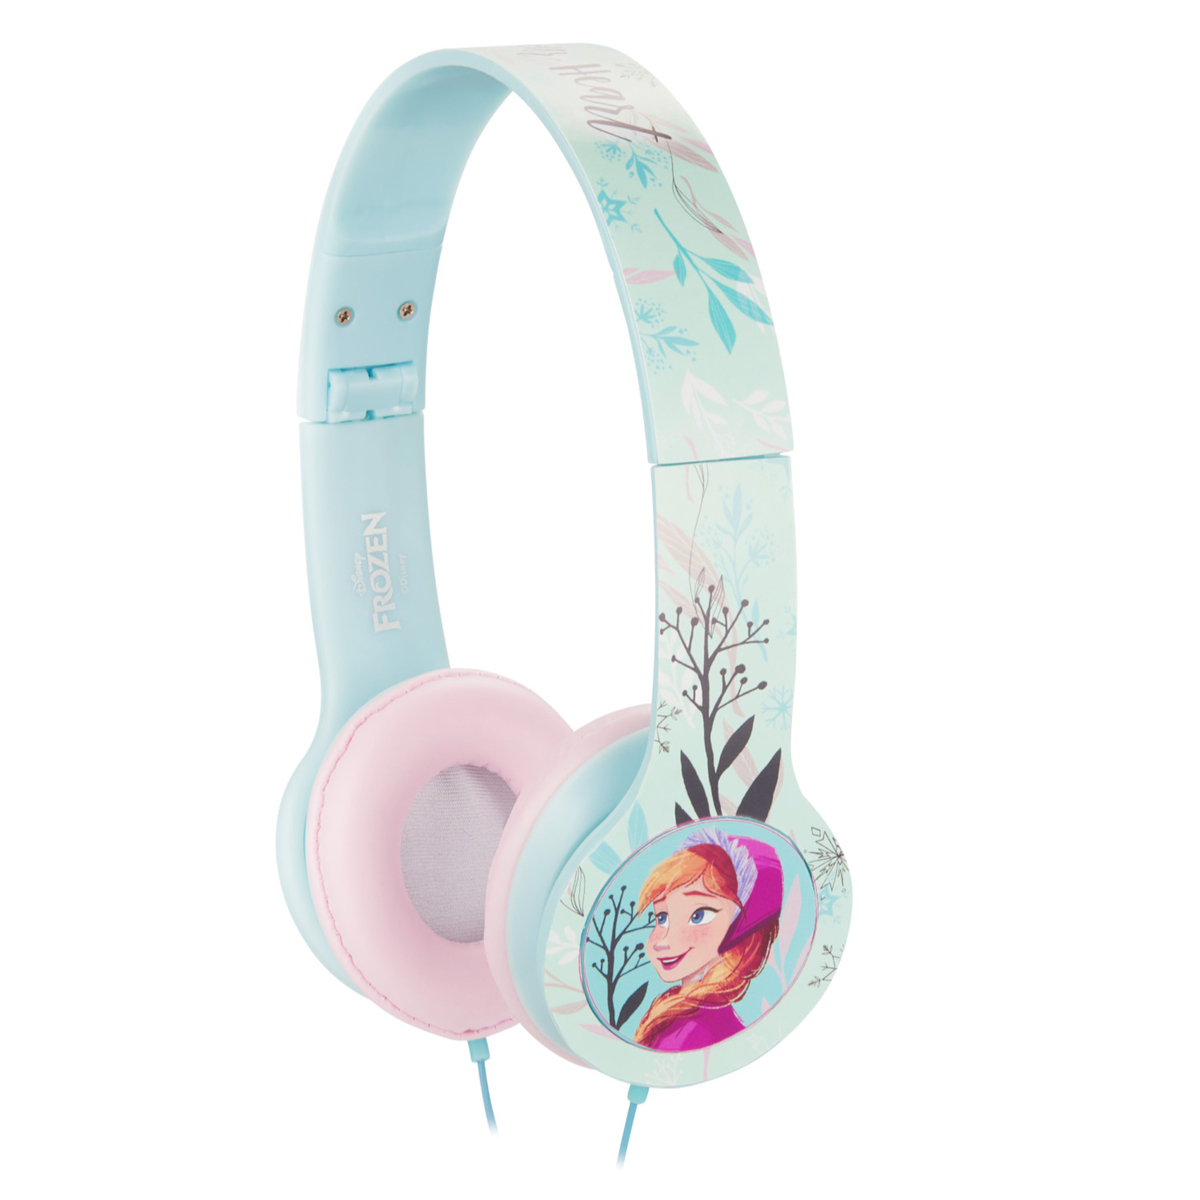 SMD Disney Frozen Stereo Headphones with Adjustable Headband and 1.2M Aux Cable, Blue, DY-10902-FRV